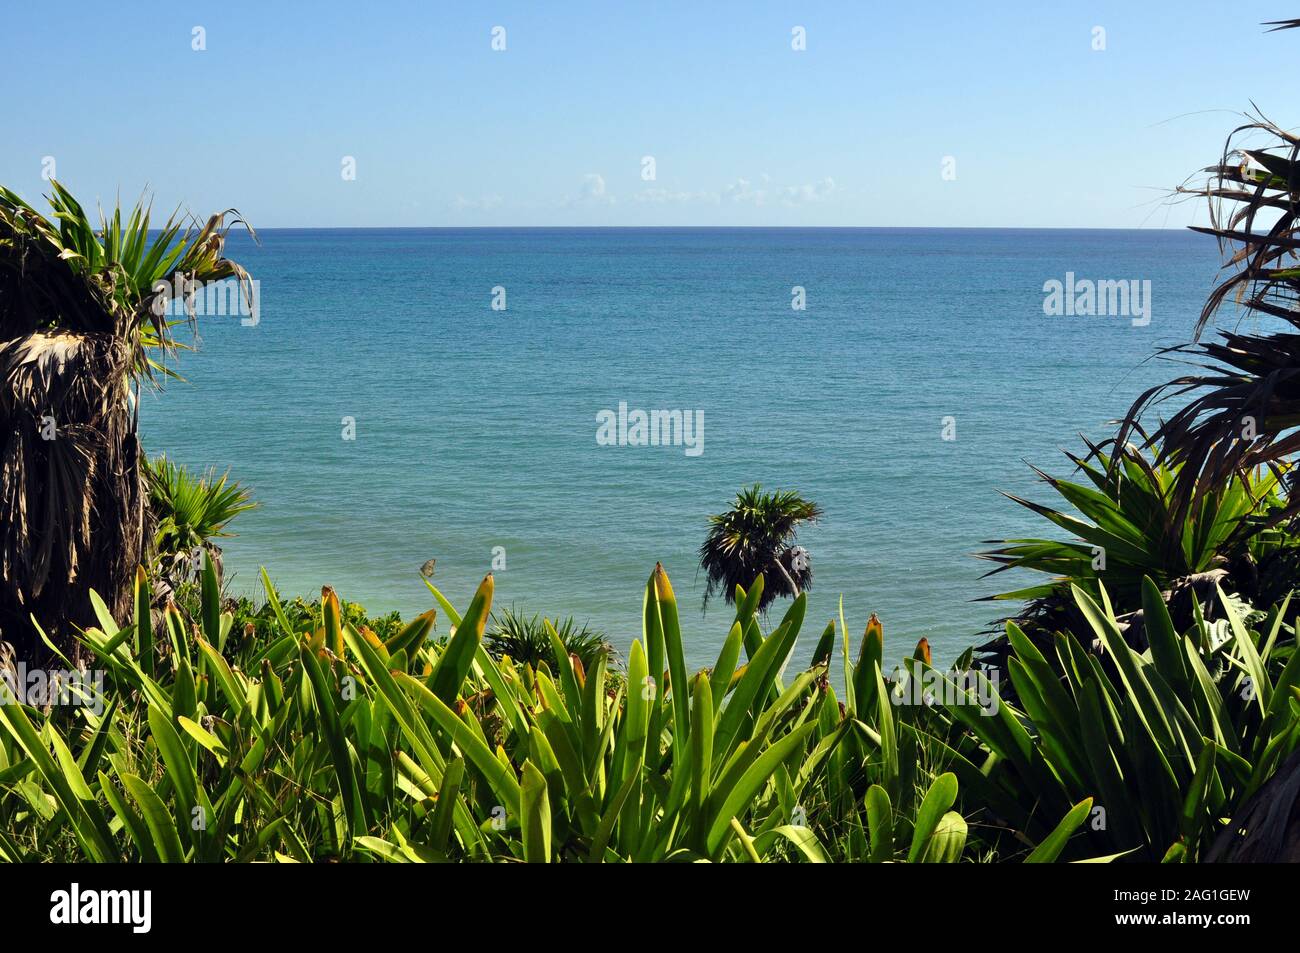 A View of the Ocean with Vegetation in the foreground. Stock Photo